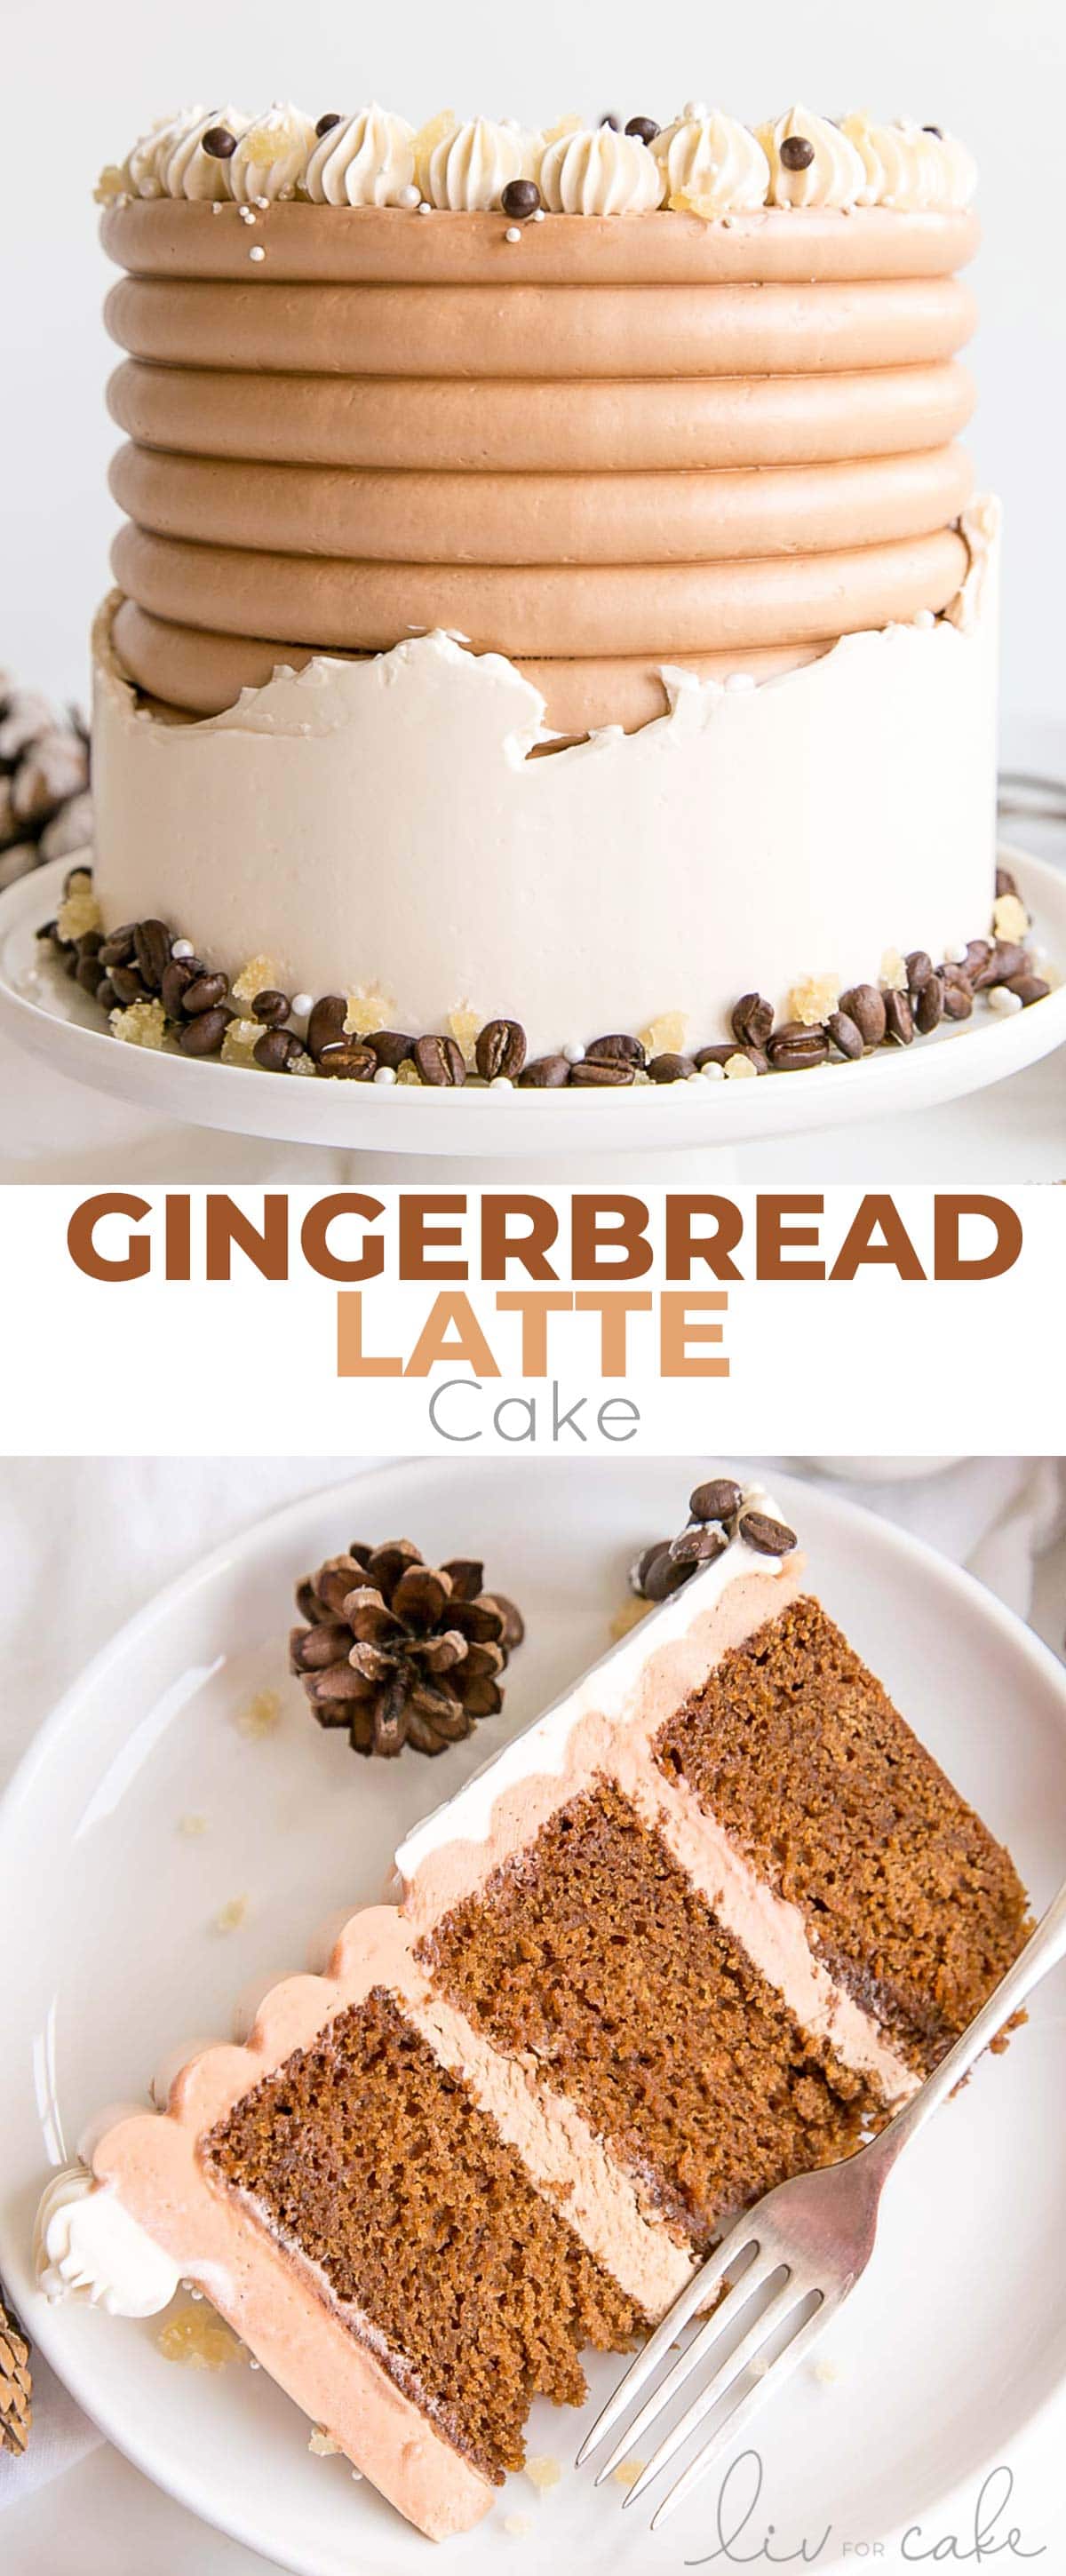 Gingerbread Latte Cake photo collage